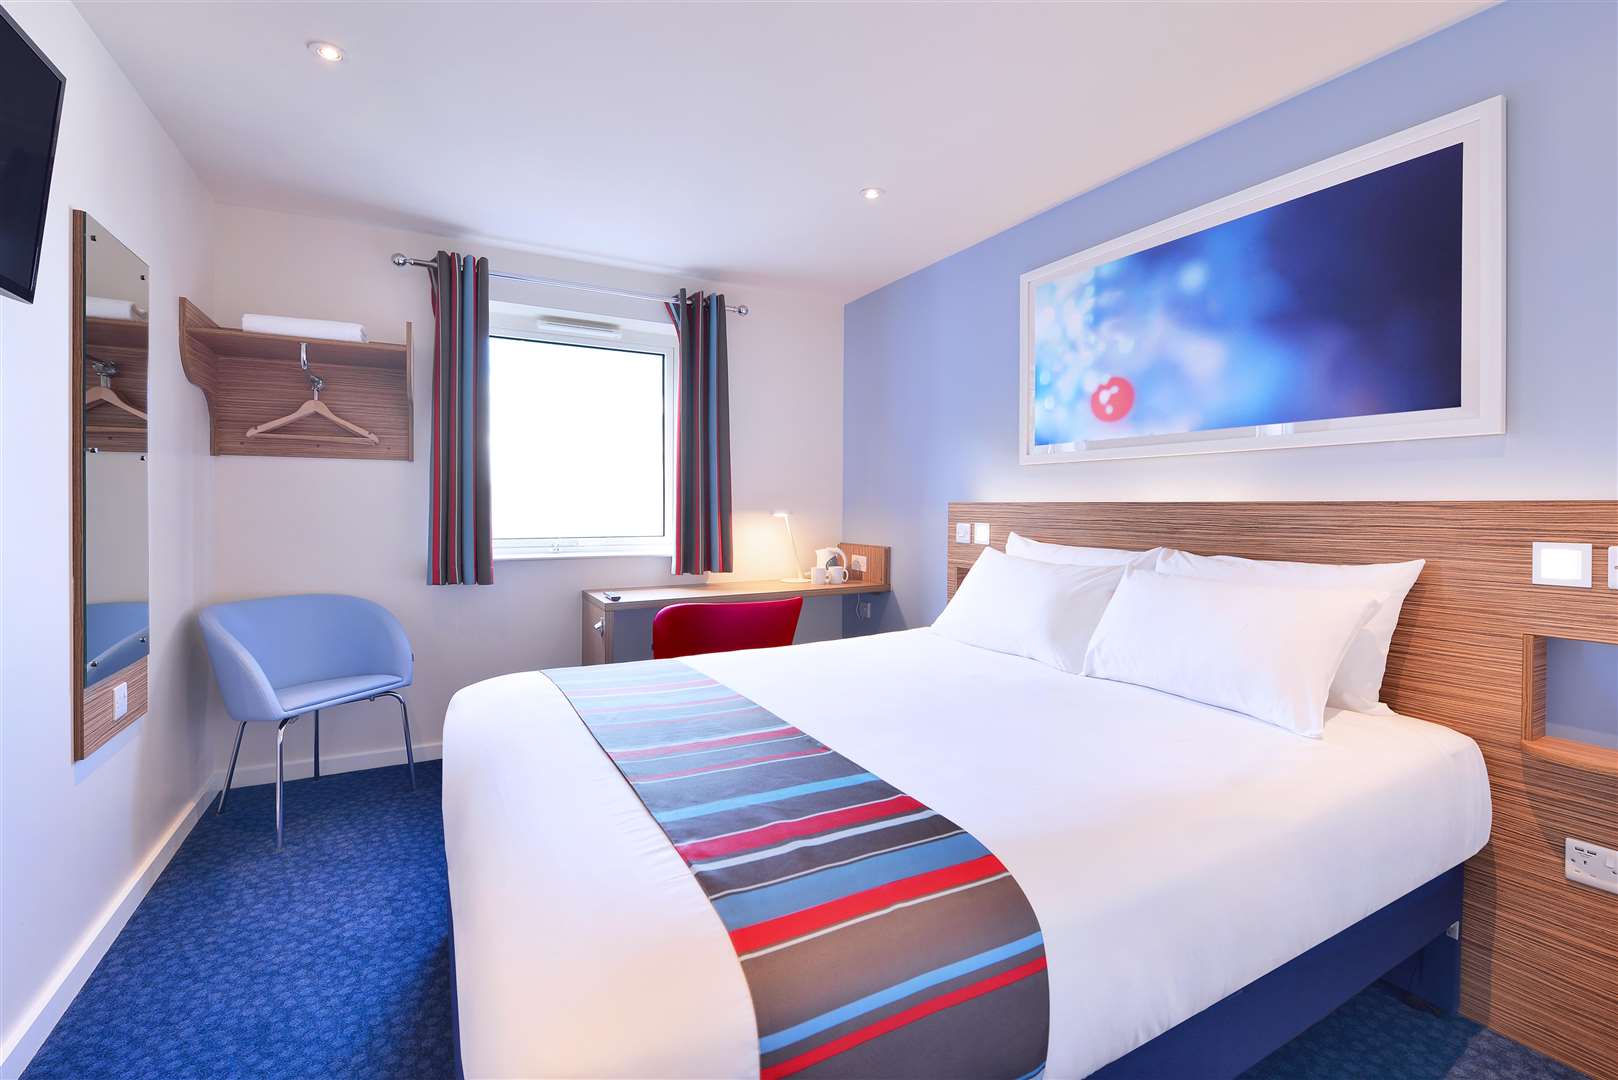 Travelodge has opened a number of new hotels in Kent and has plans for others